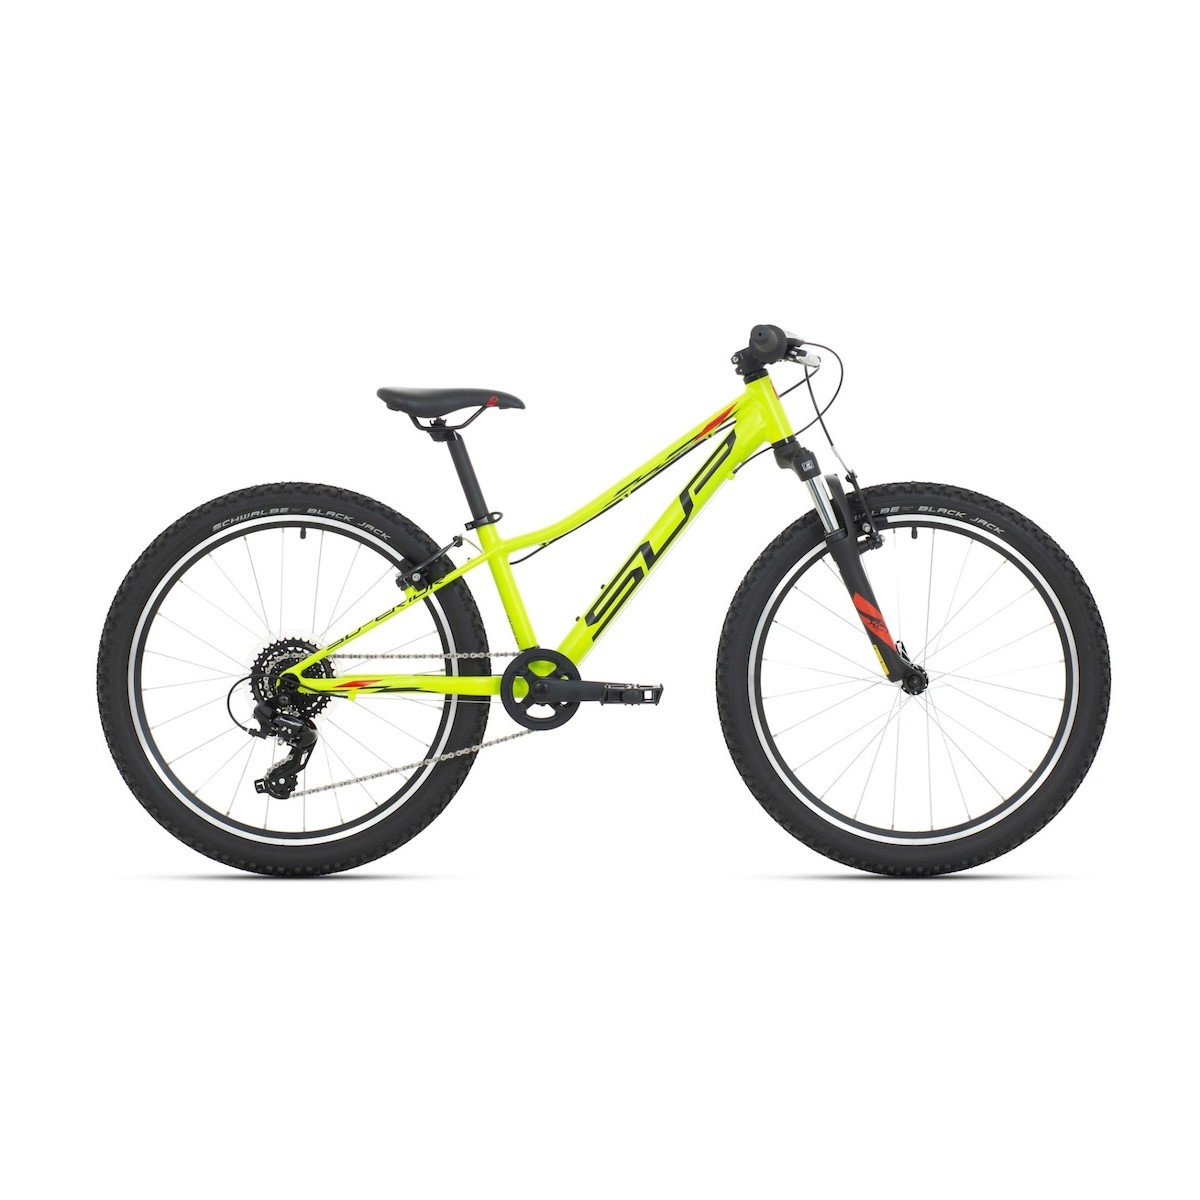 SUPERIOR RACER XC 24 kids bicycle - matte lime/black/red